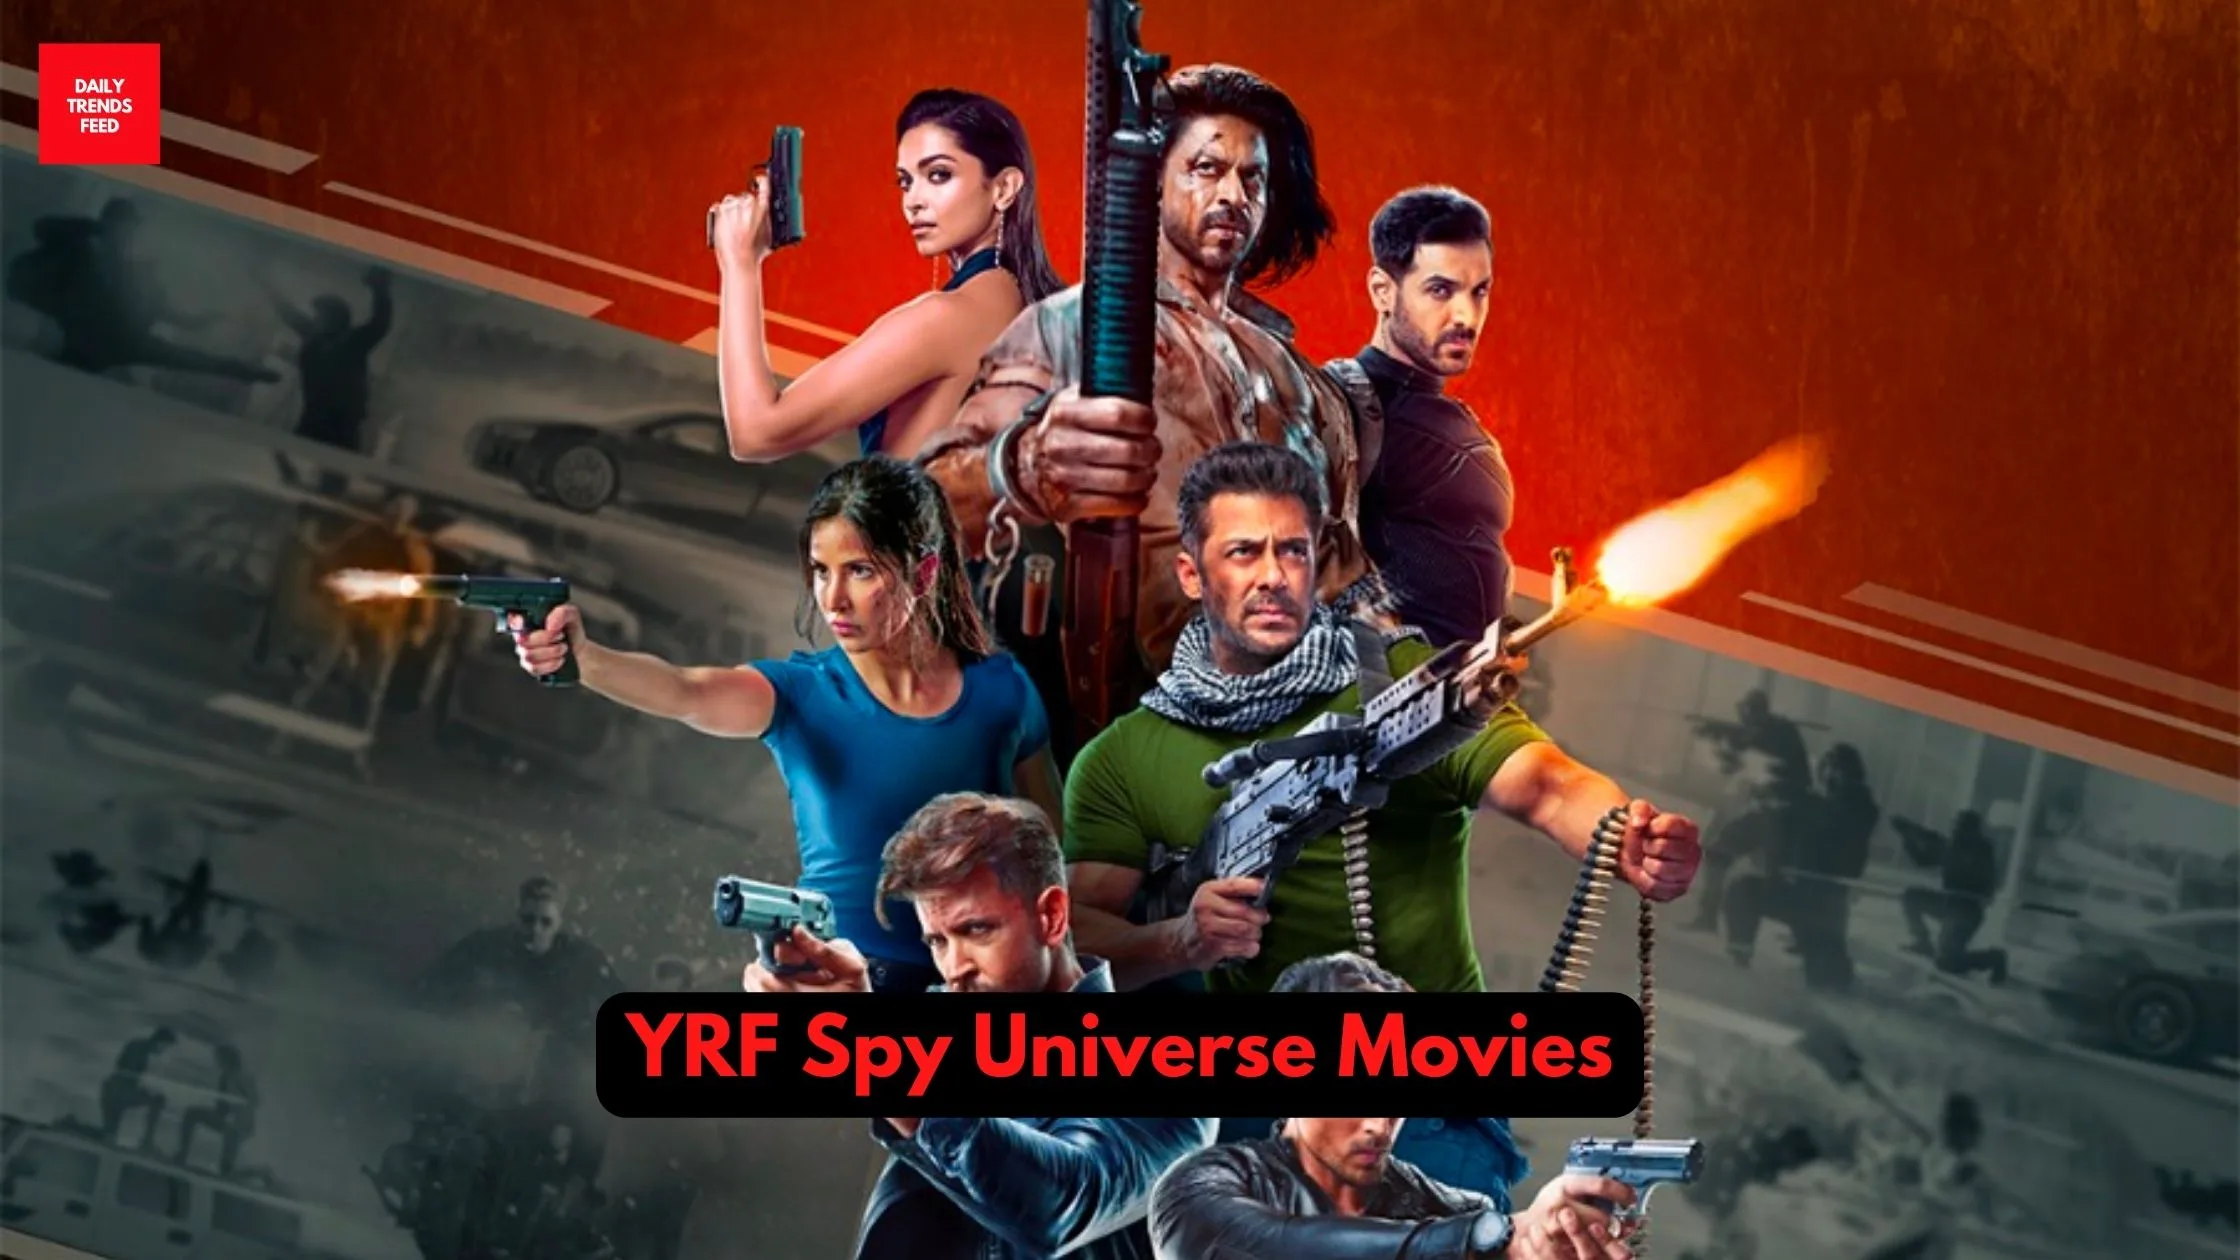 YRF Spy Universe Movies: Watch These 4 Movies On OTT Before Tiger 3 Releases!